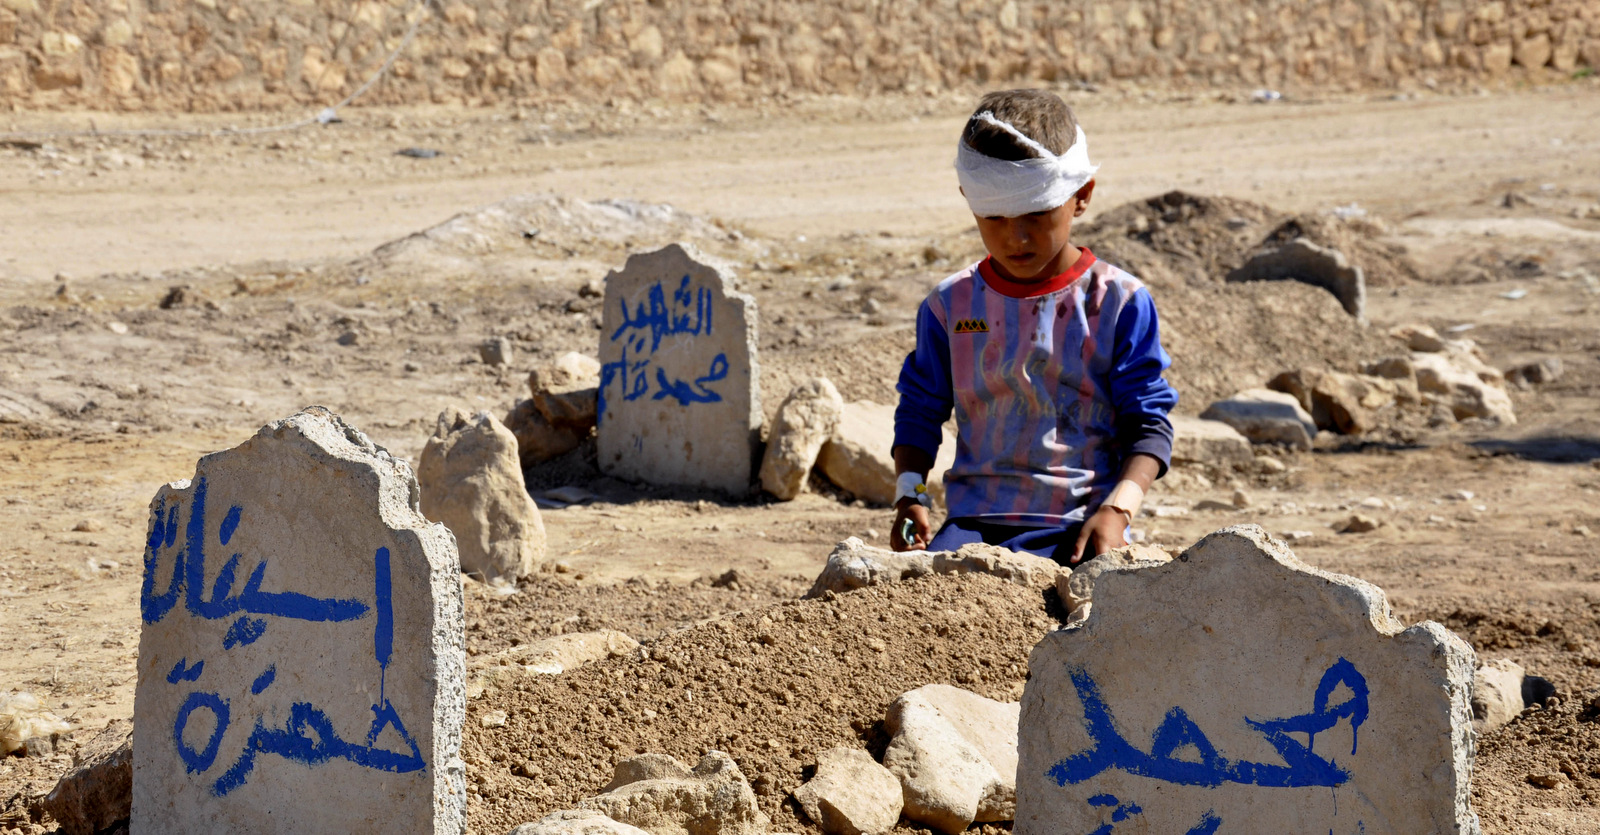 Ali Hamza, 8, sits at the graves of his brother, Mohammed, and sister Asinat, who were killed at their school when a suicide car bomb attack near Qabak elementary school in the Shiite Turkomen village of Qabak, Iraq, Oct. 7, 2013. (AP Photo)